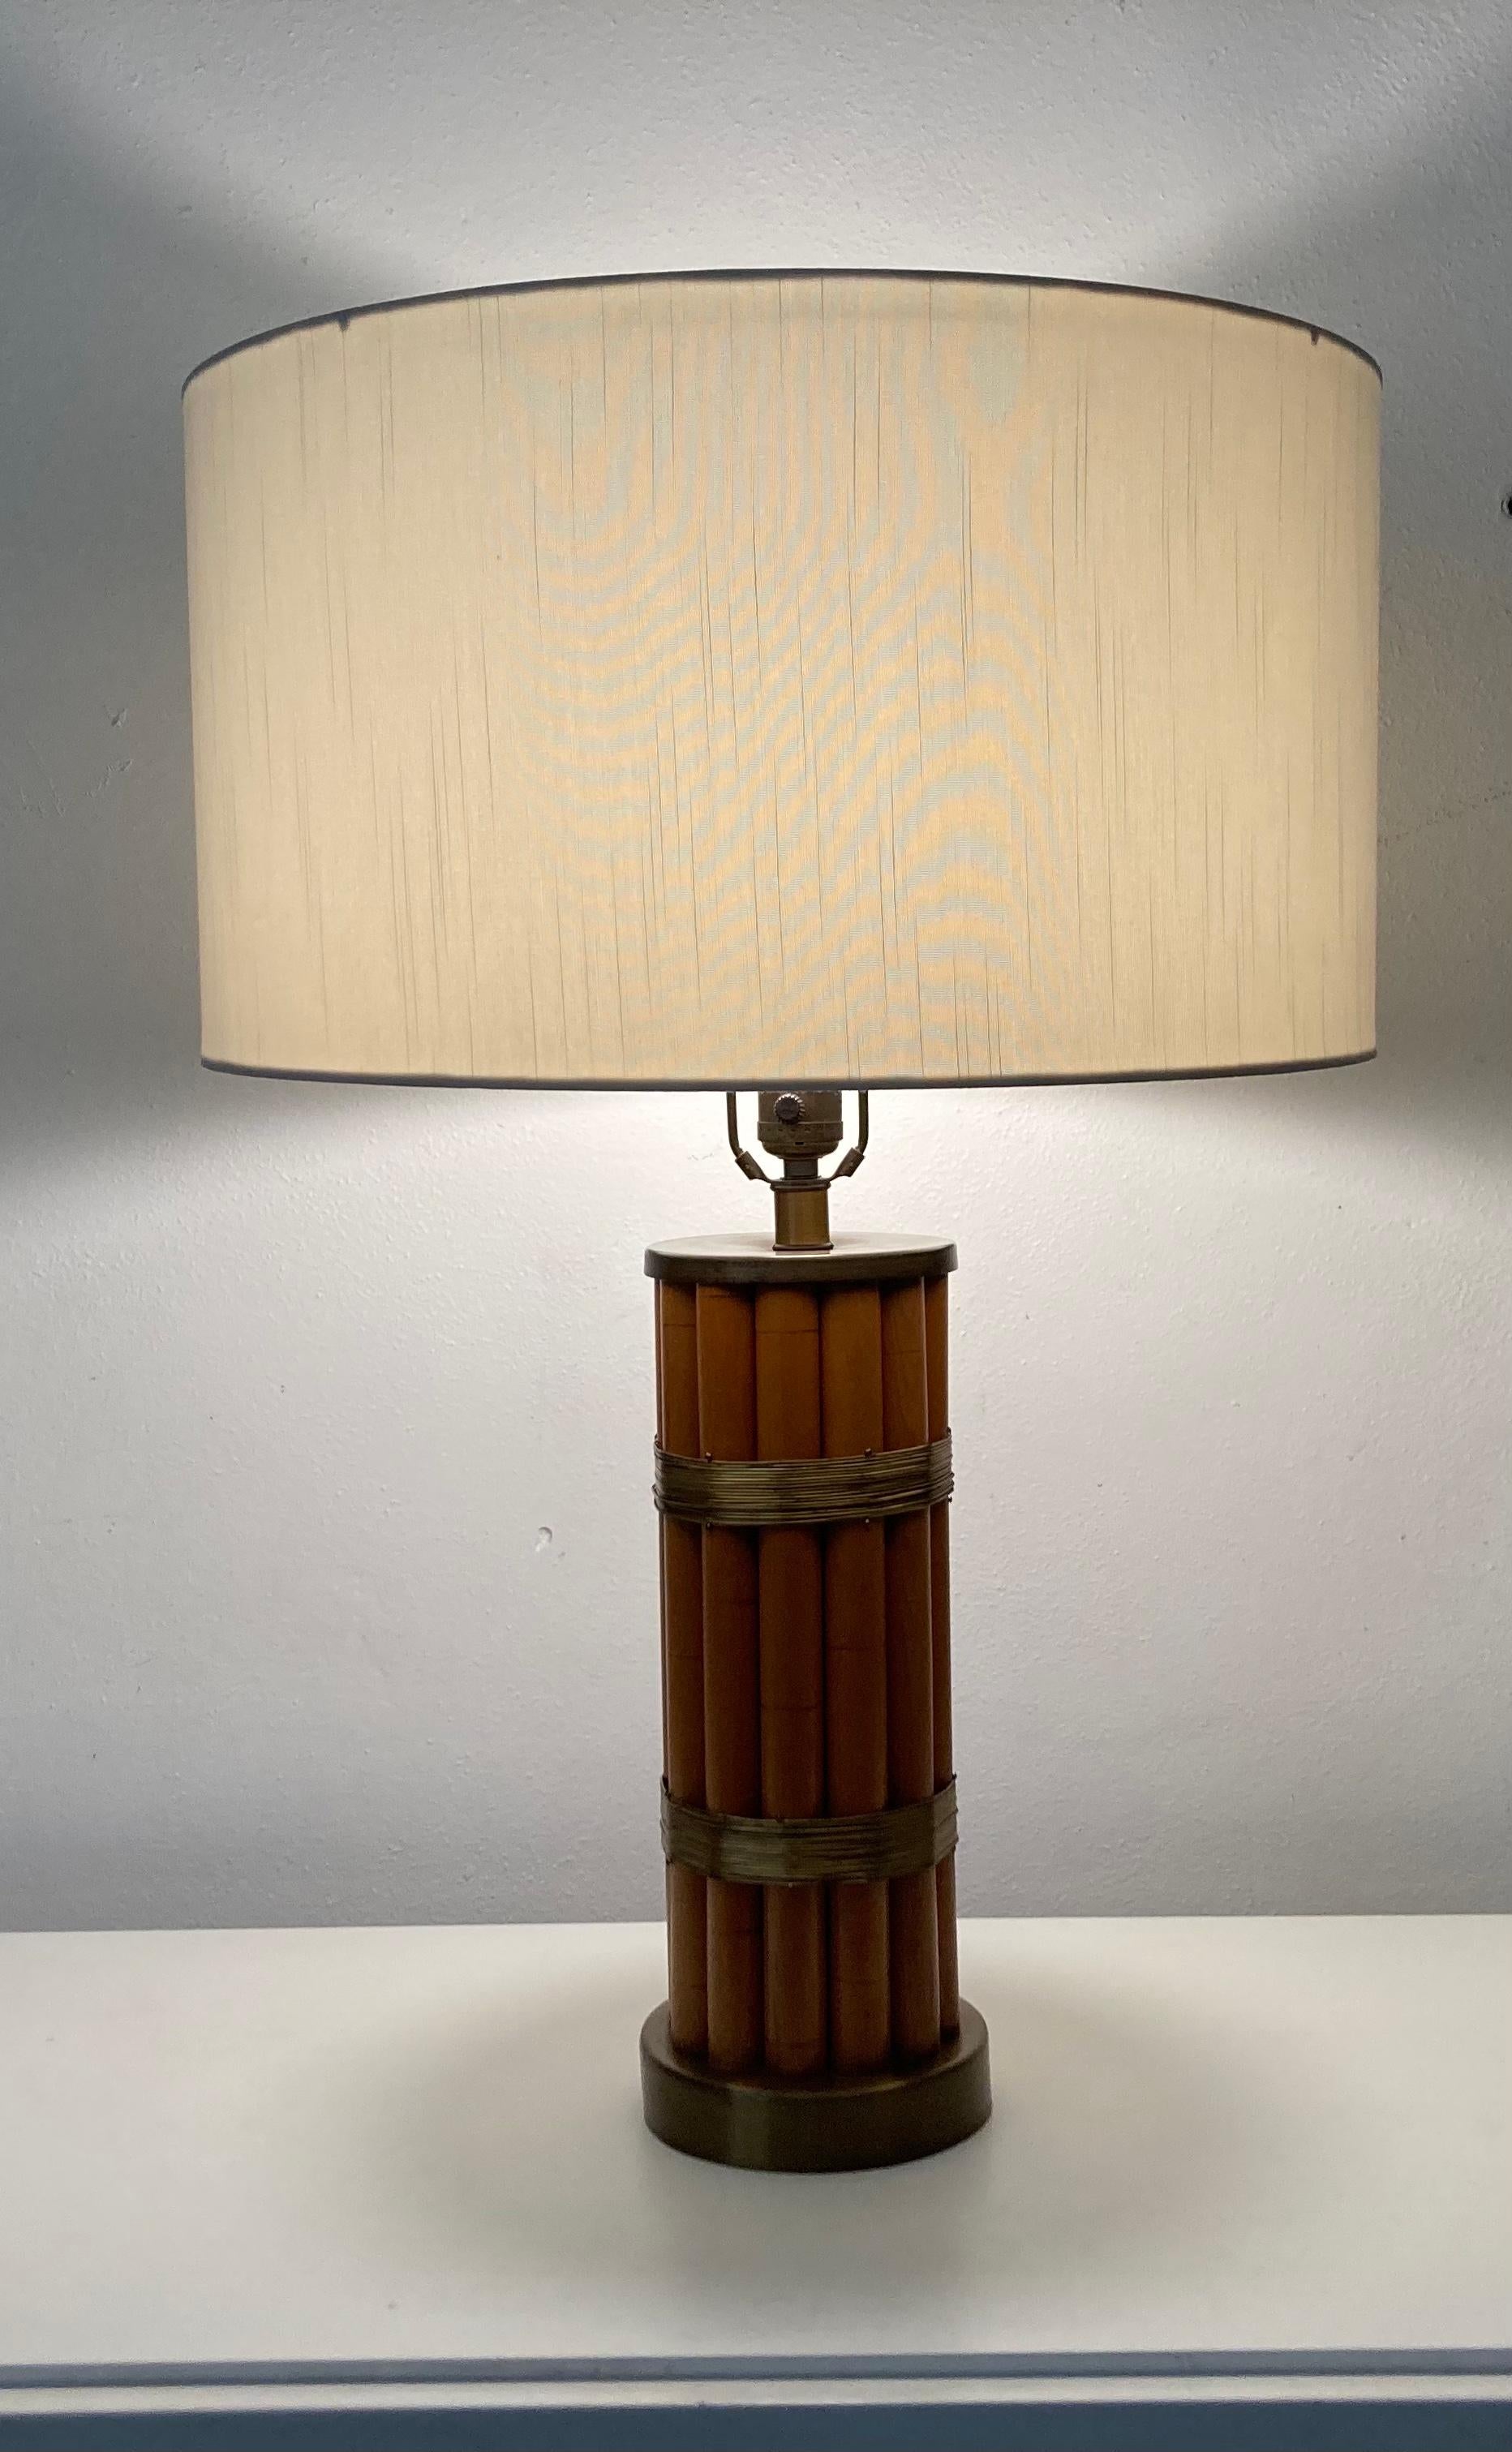 Pair of original Russel Wright Table Lamps, faux bamboo and brass. 
Table Lamp is 5.75” in diameter. Shade is 18.25” in diameter. 
Current lampshades have some spots and will be replaced by seller.